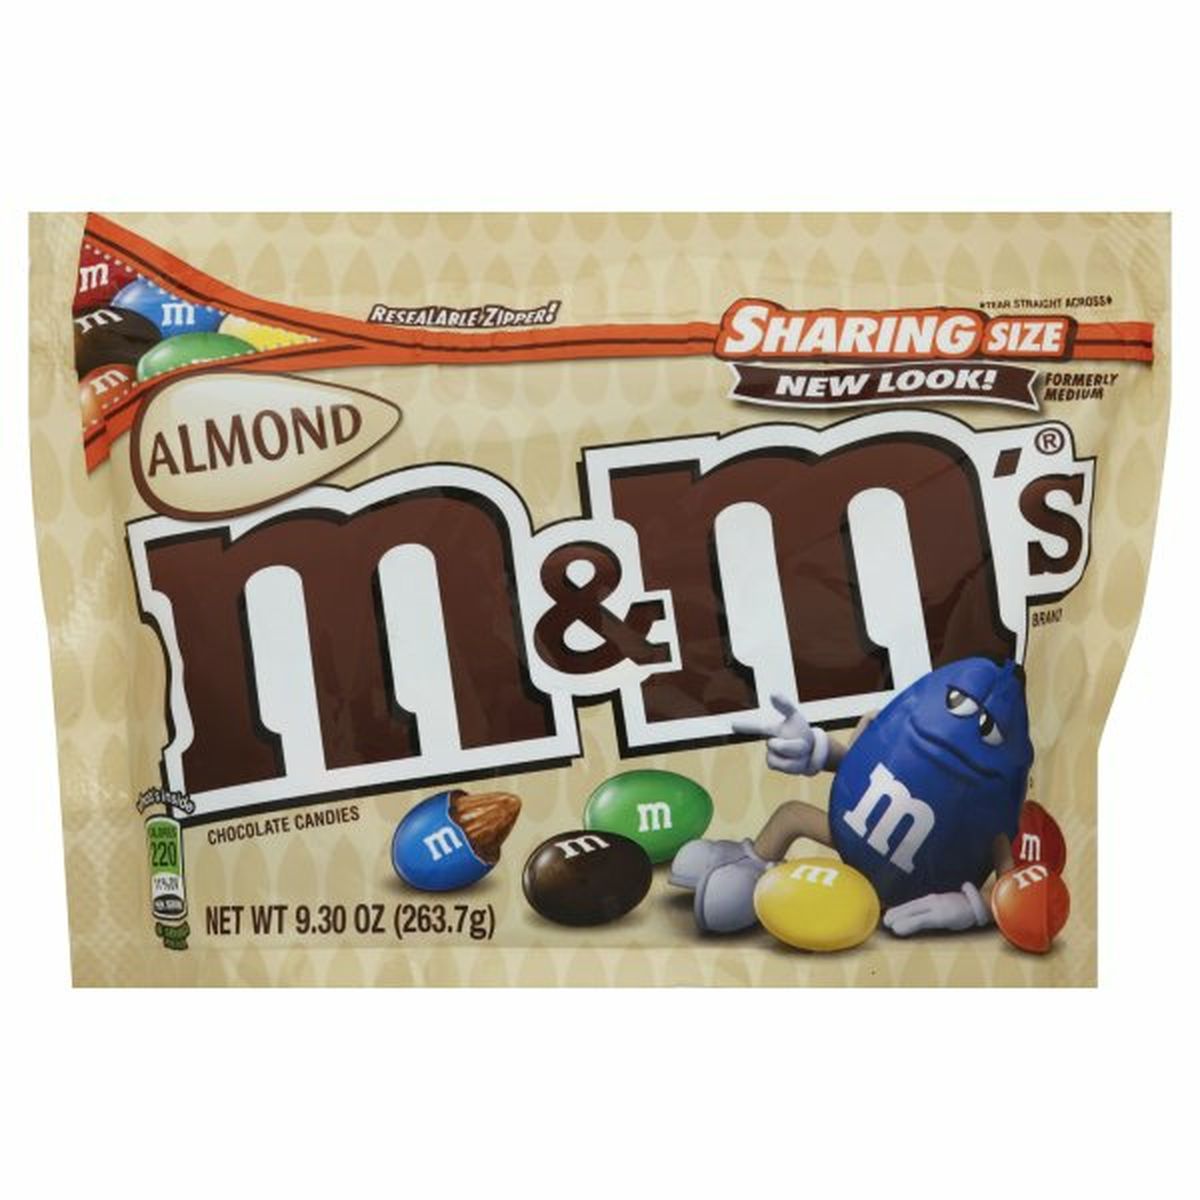 Calories in M&M's Chocolate Candies, Almond, Sharing Size